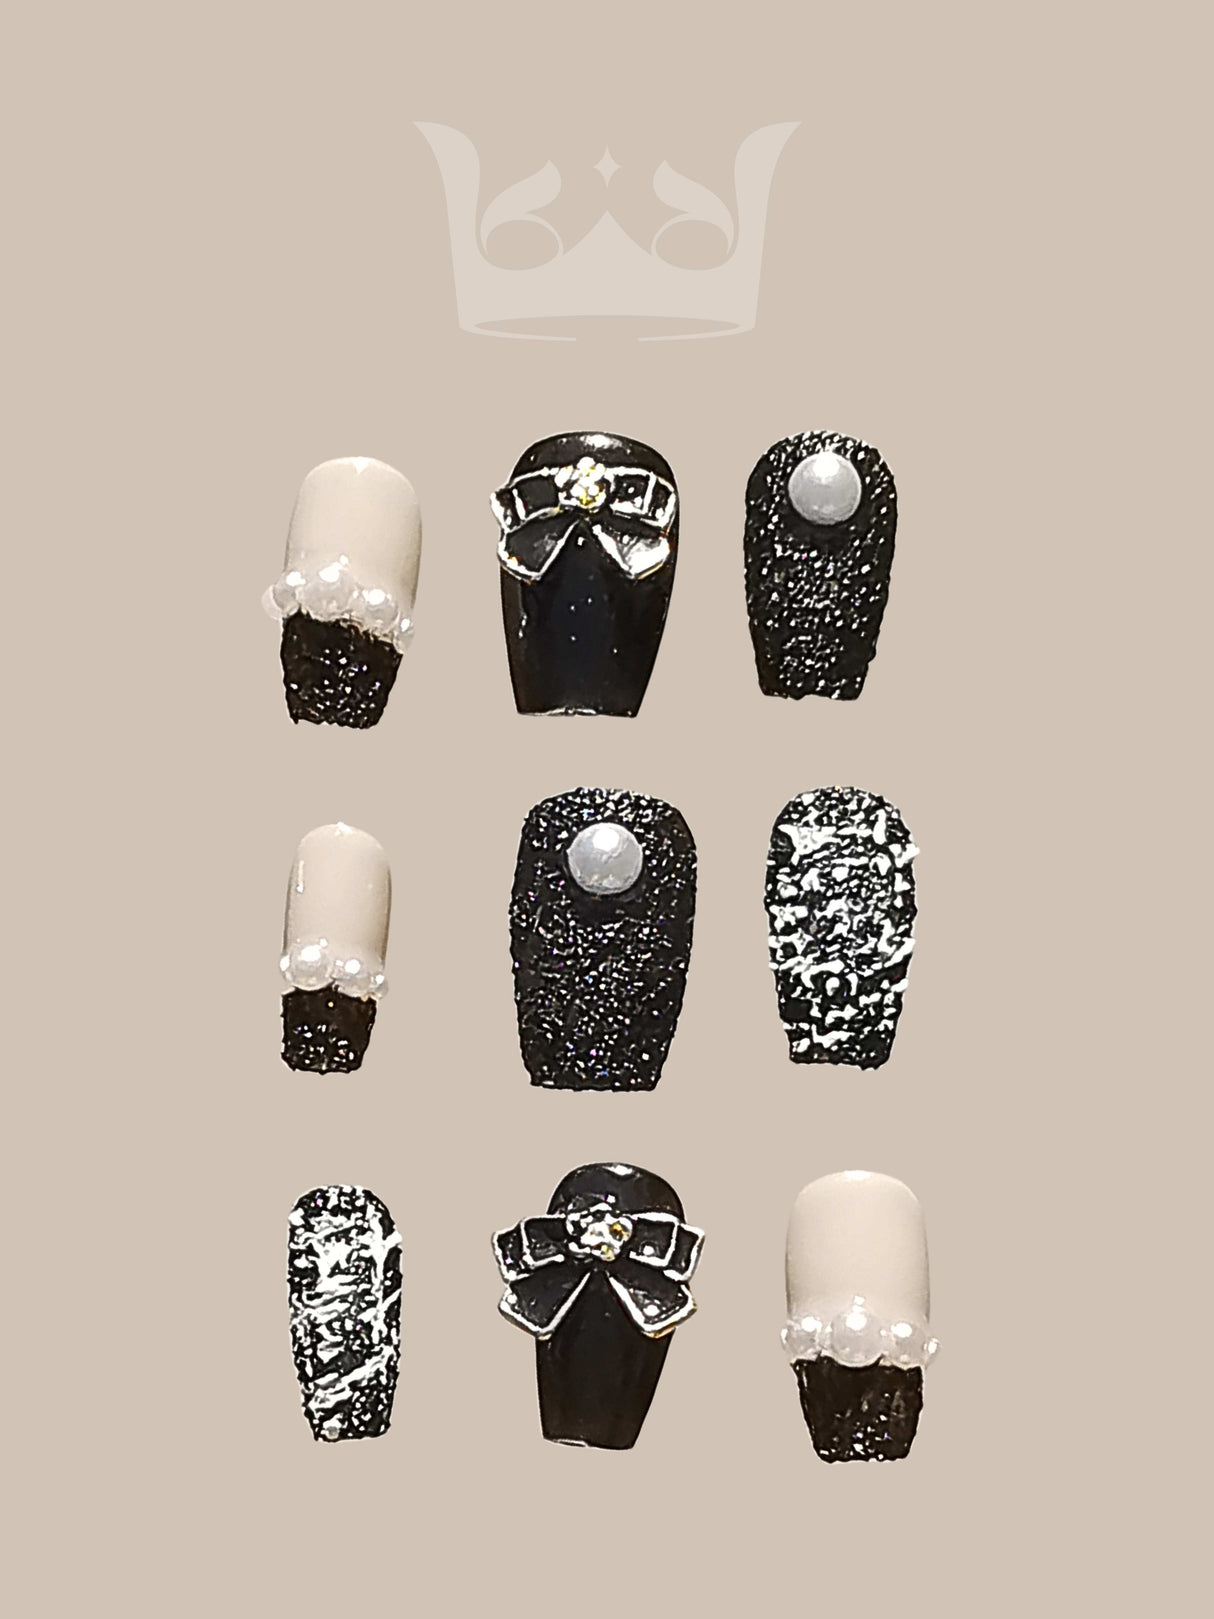 These press-on nails are for nail art enthusiasts. The collection features various designs and embellishments with a black-and-white color scheme, adding a modern and fancy look. 